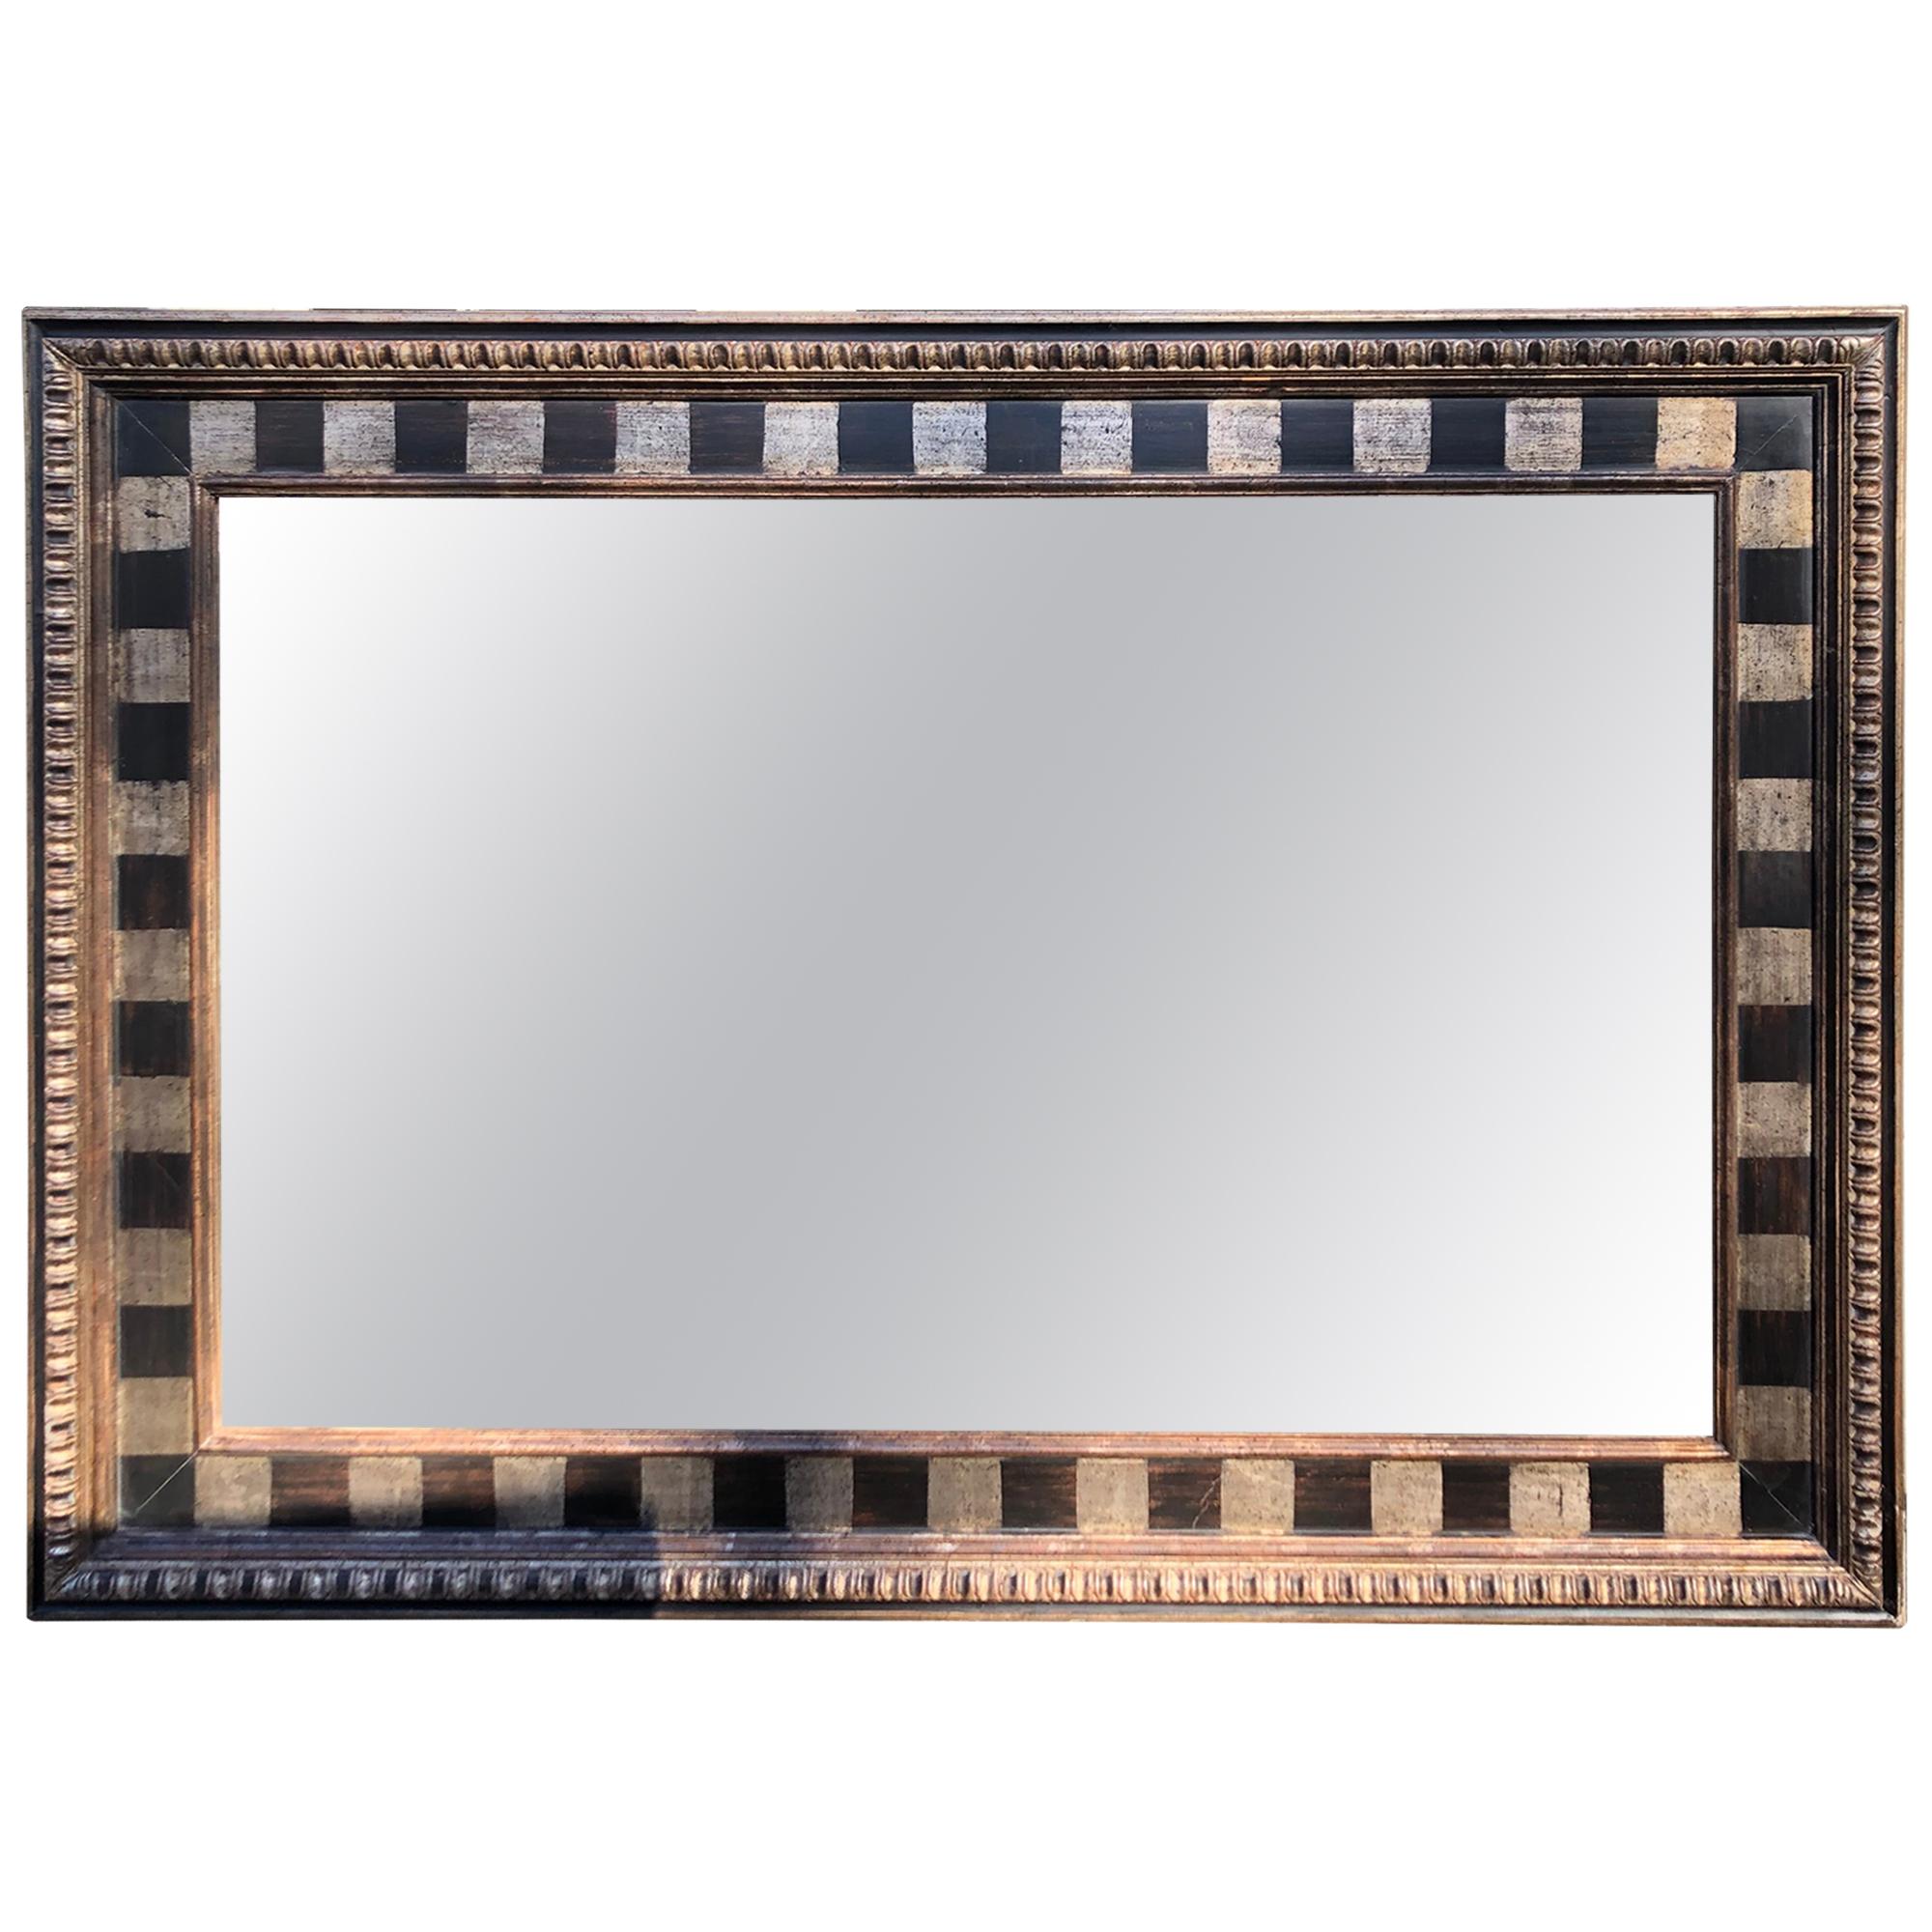 Monumental Gigantic Rectangular Checkerboard Mirror with Silver and Gold